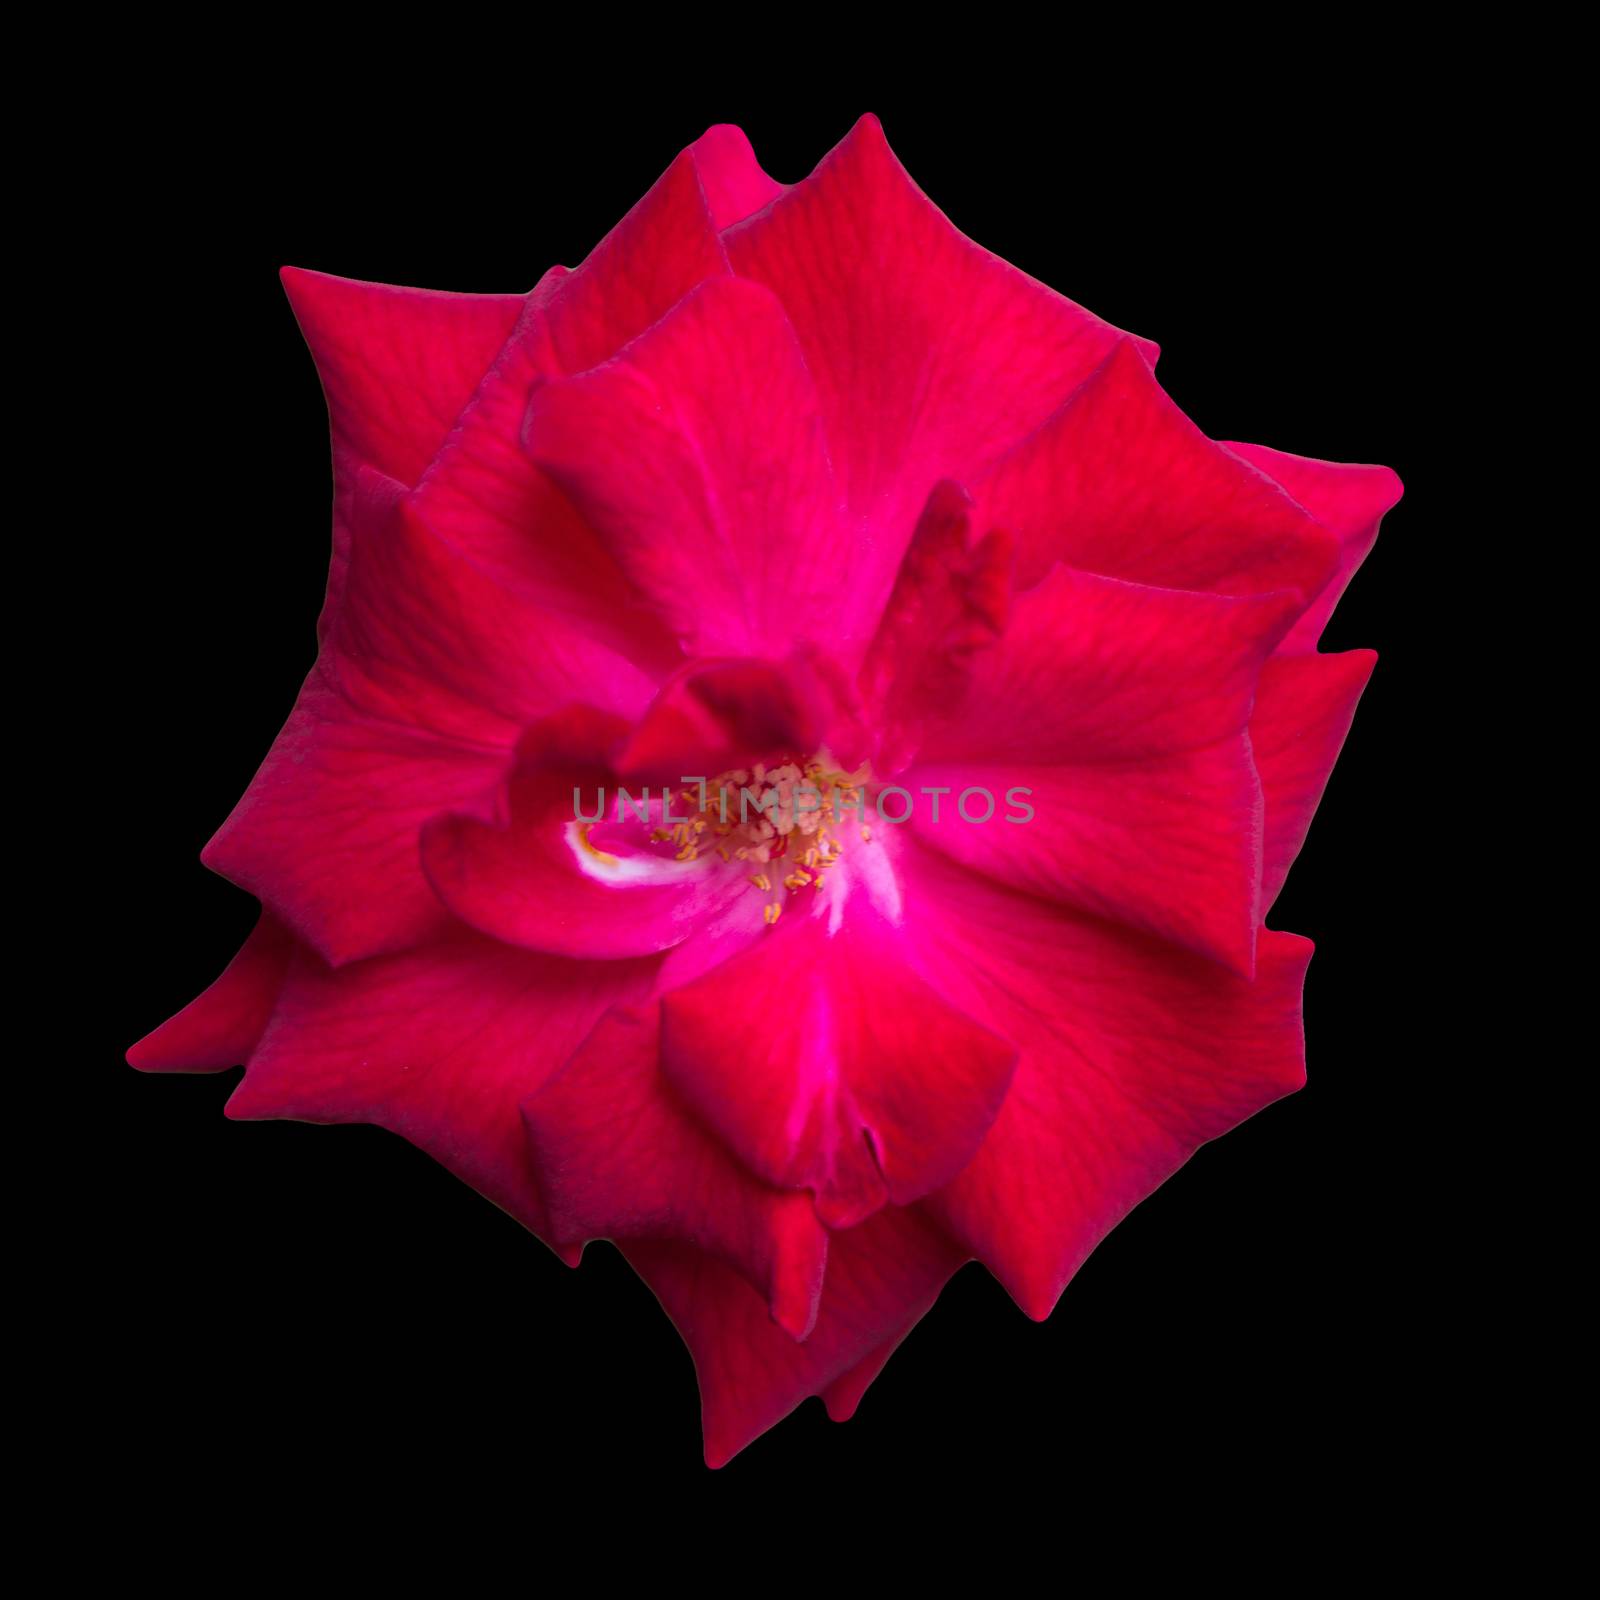 Red flower isolated on the black background and texture with clipping path.